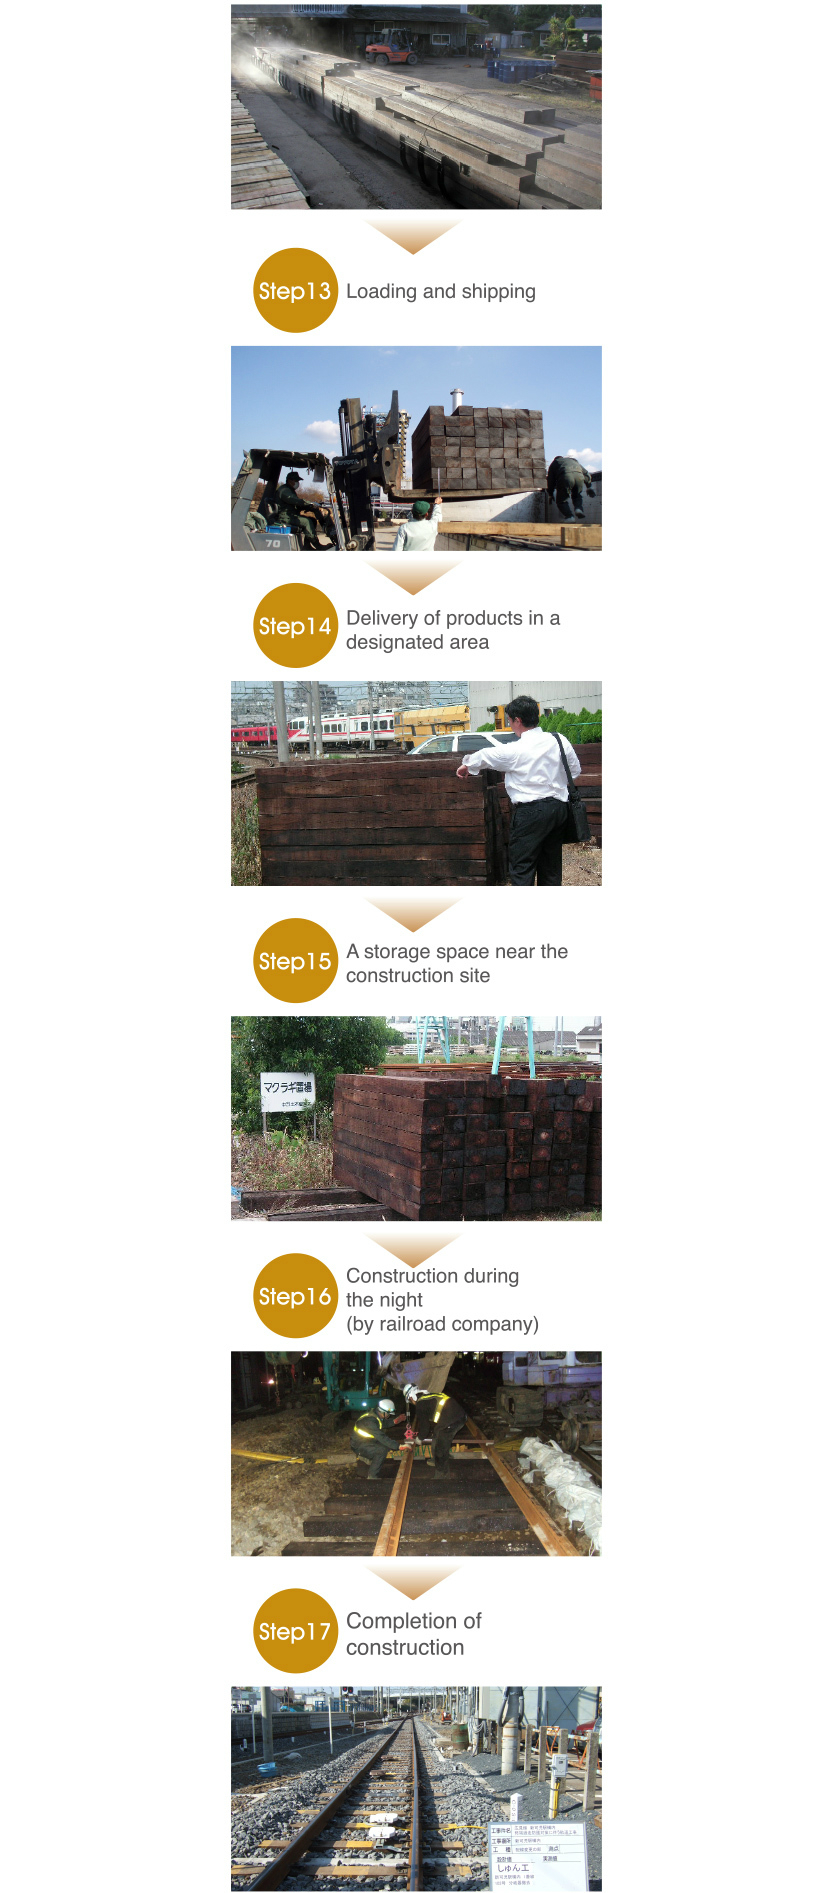 The process of railroad ties